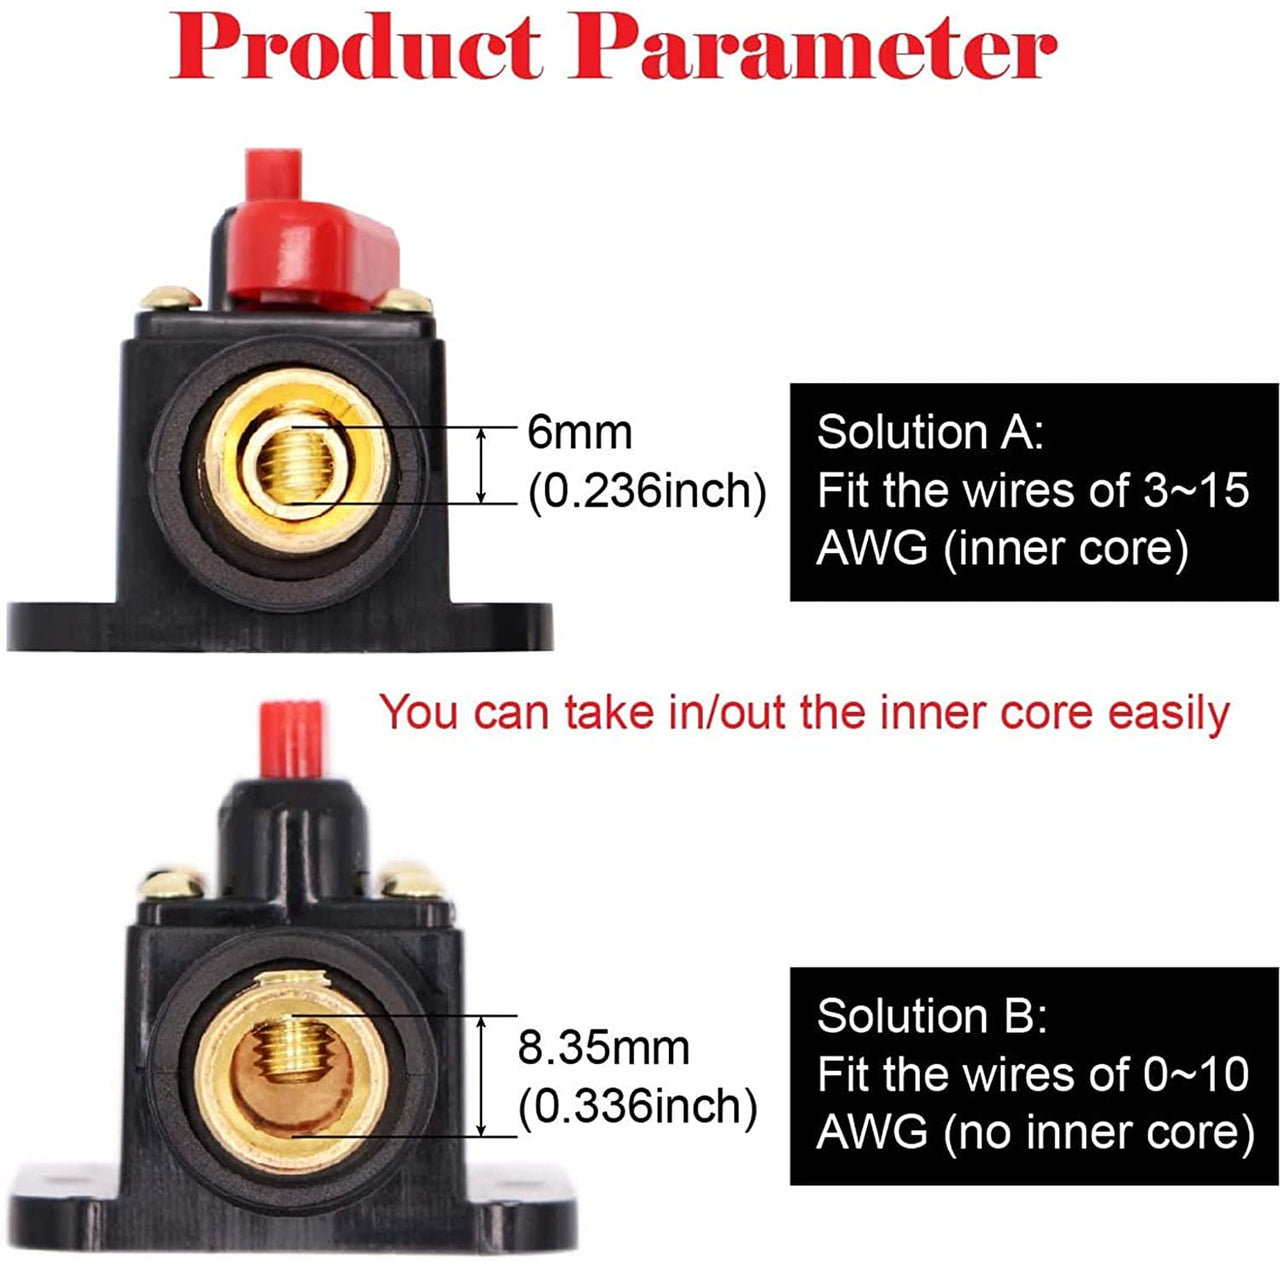 Absolute ICB150 4/8 AWG 150 Amp in-line Circuit Breaker with Manual Reset with Manual Reset Car Auto Marine Boat Stereo